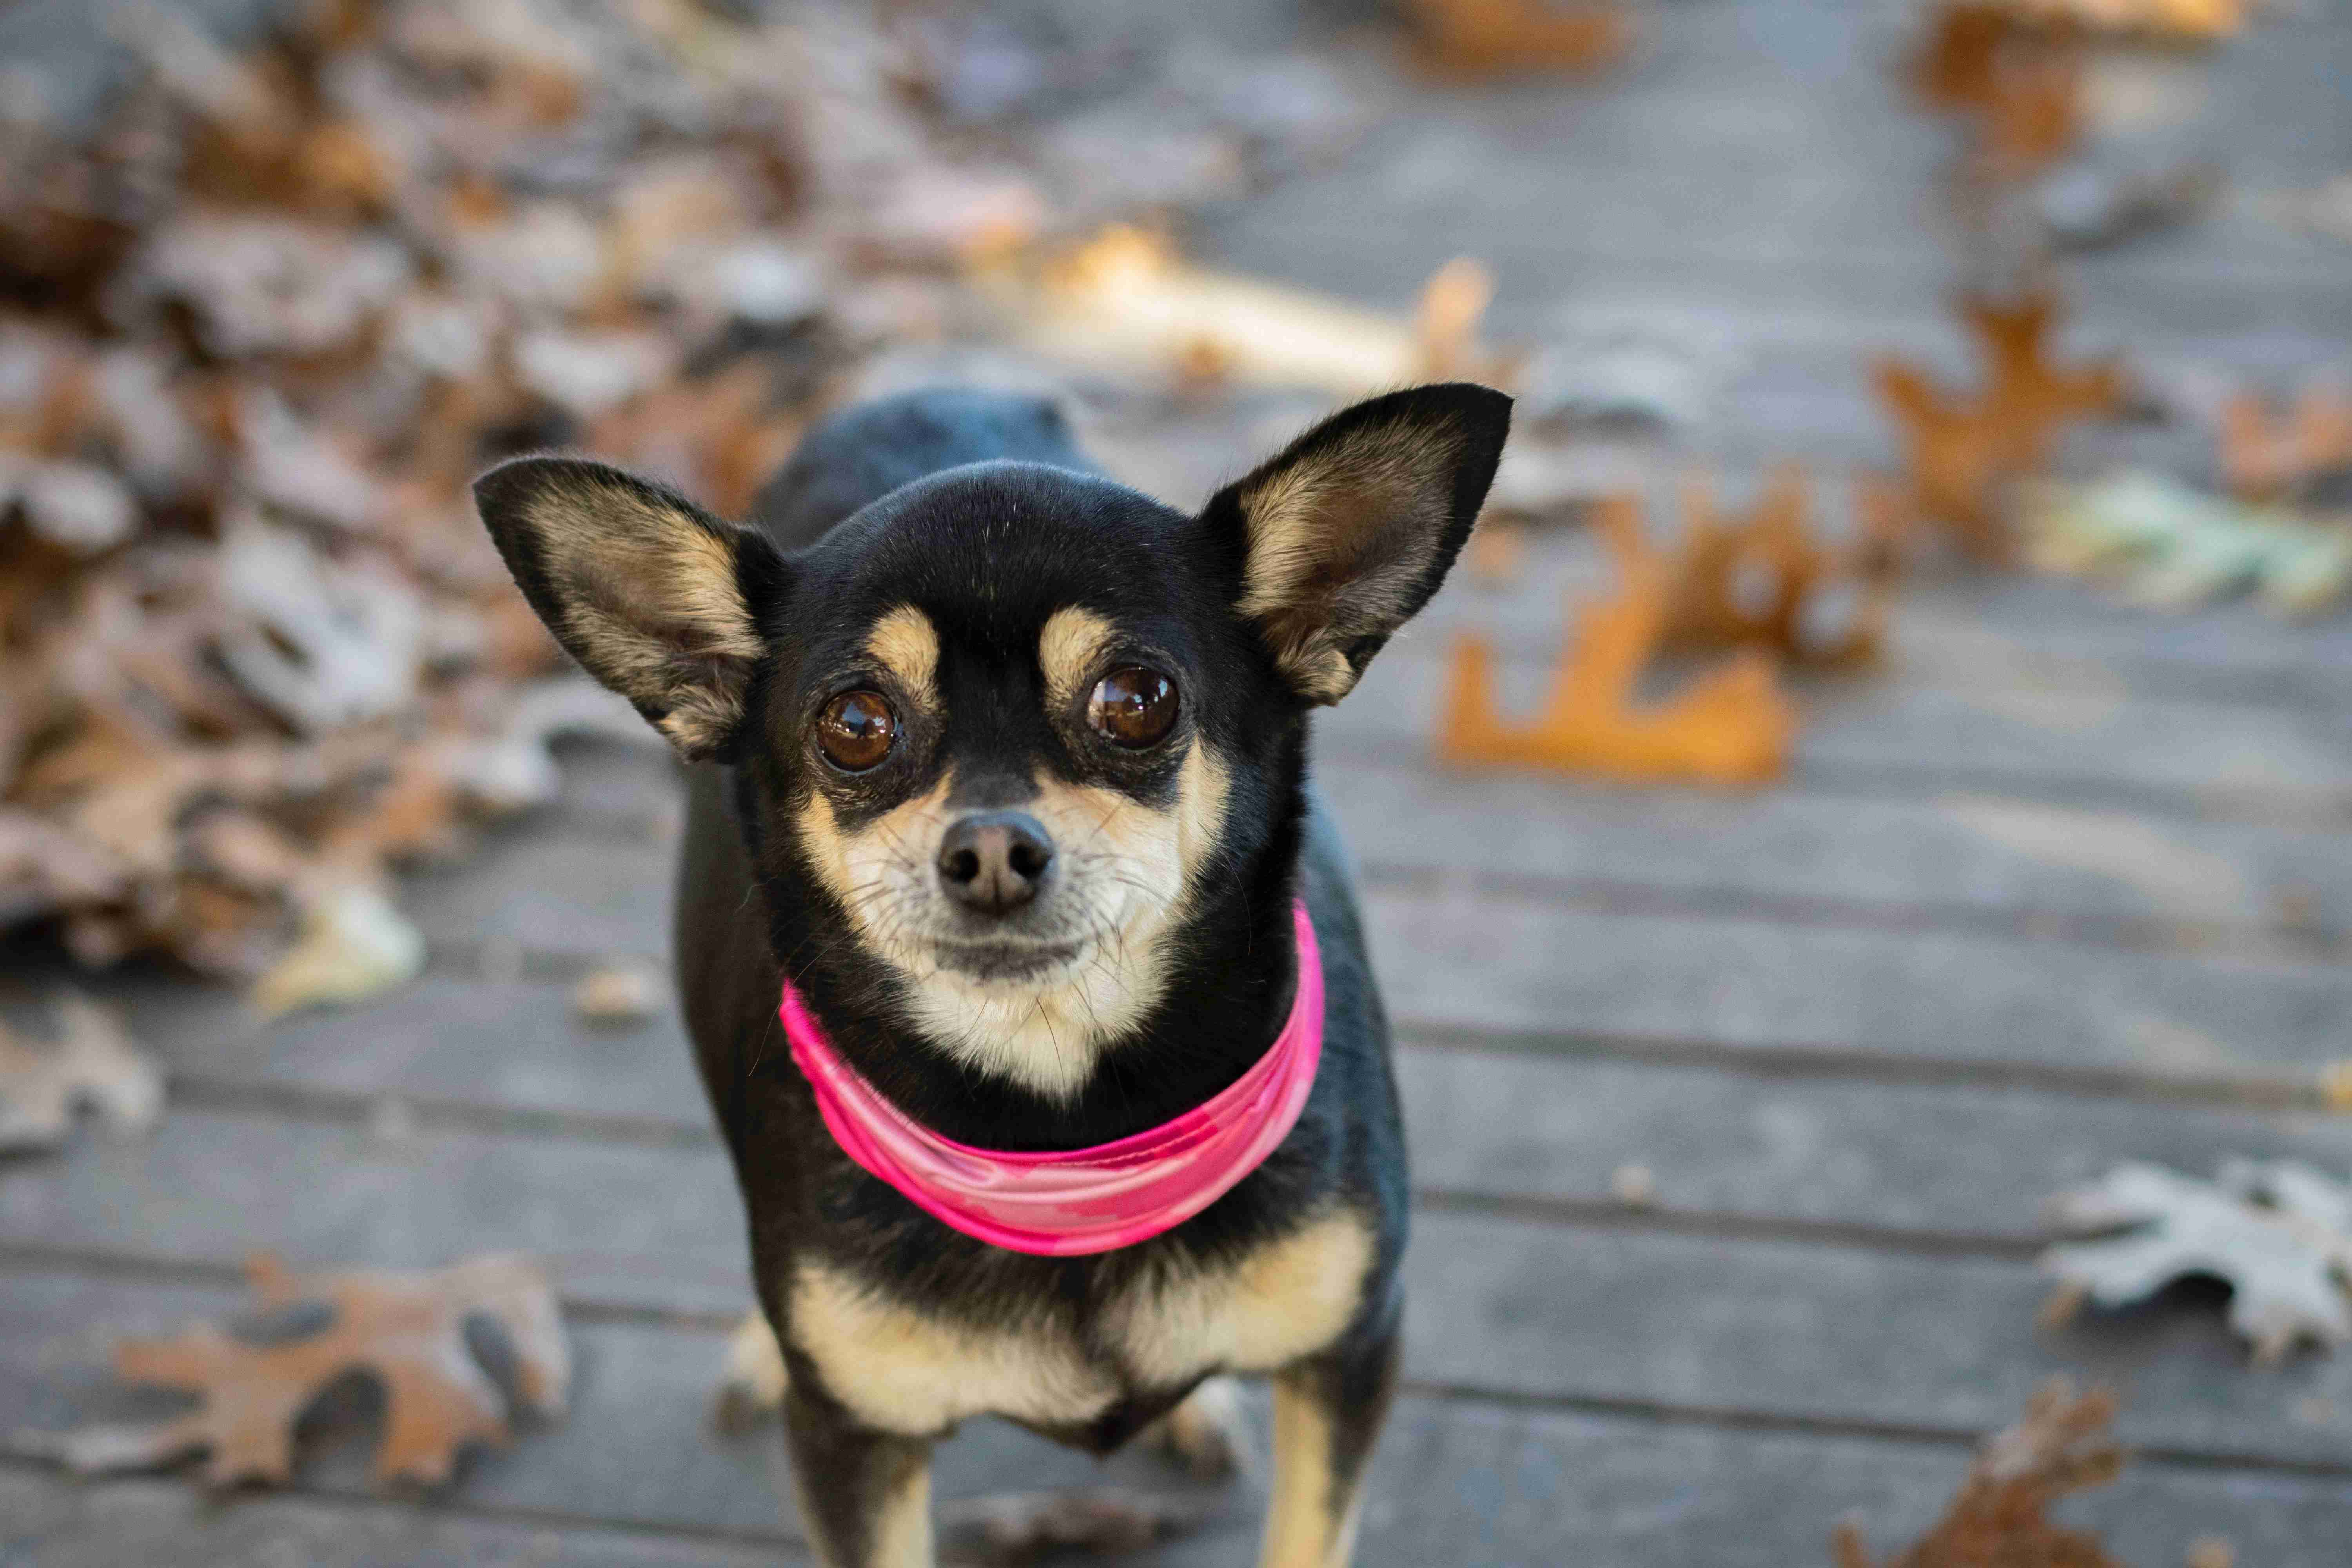 Are there any particular situations or environments that are more likely to trigger Chihuahua aggression?